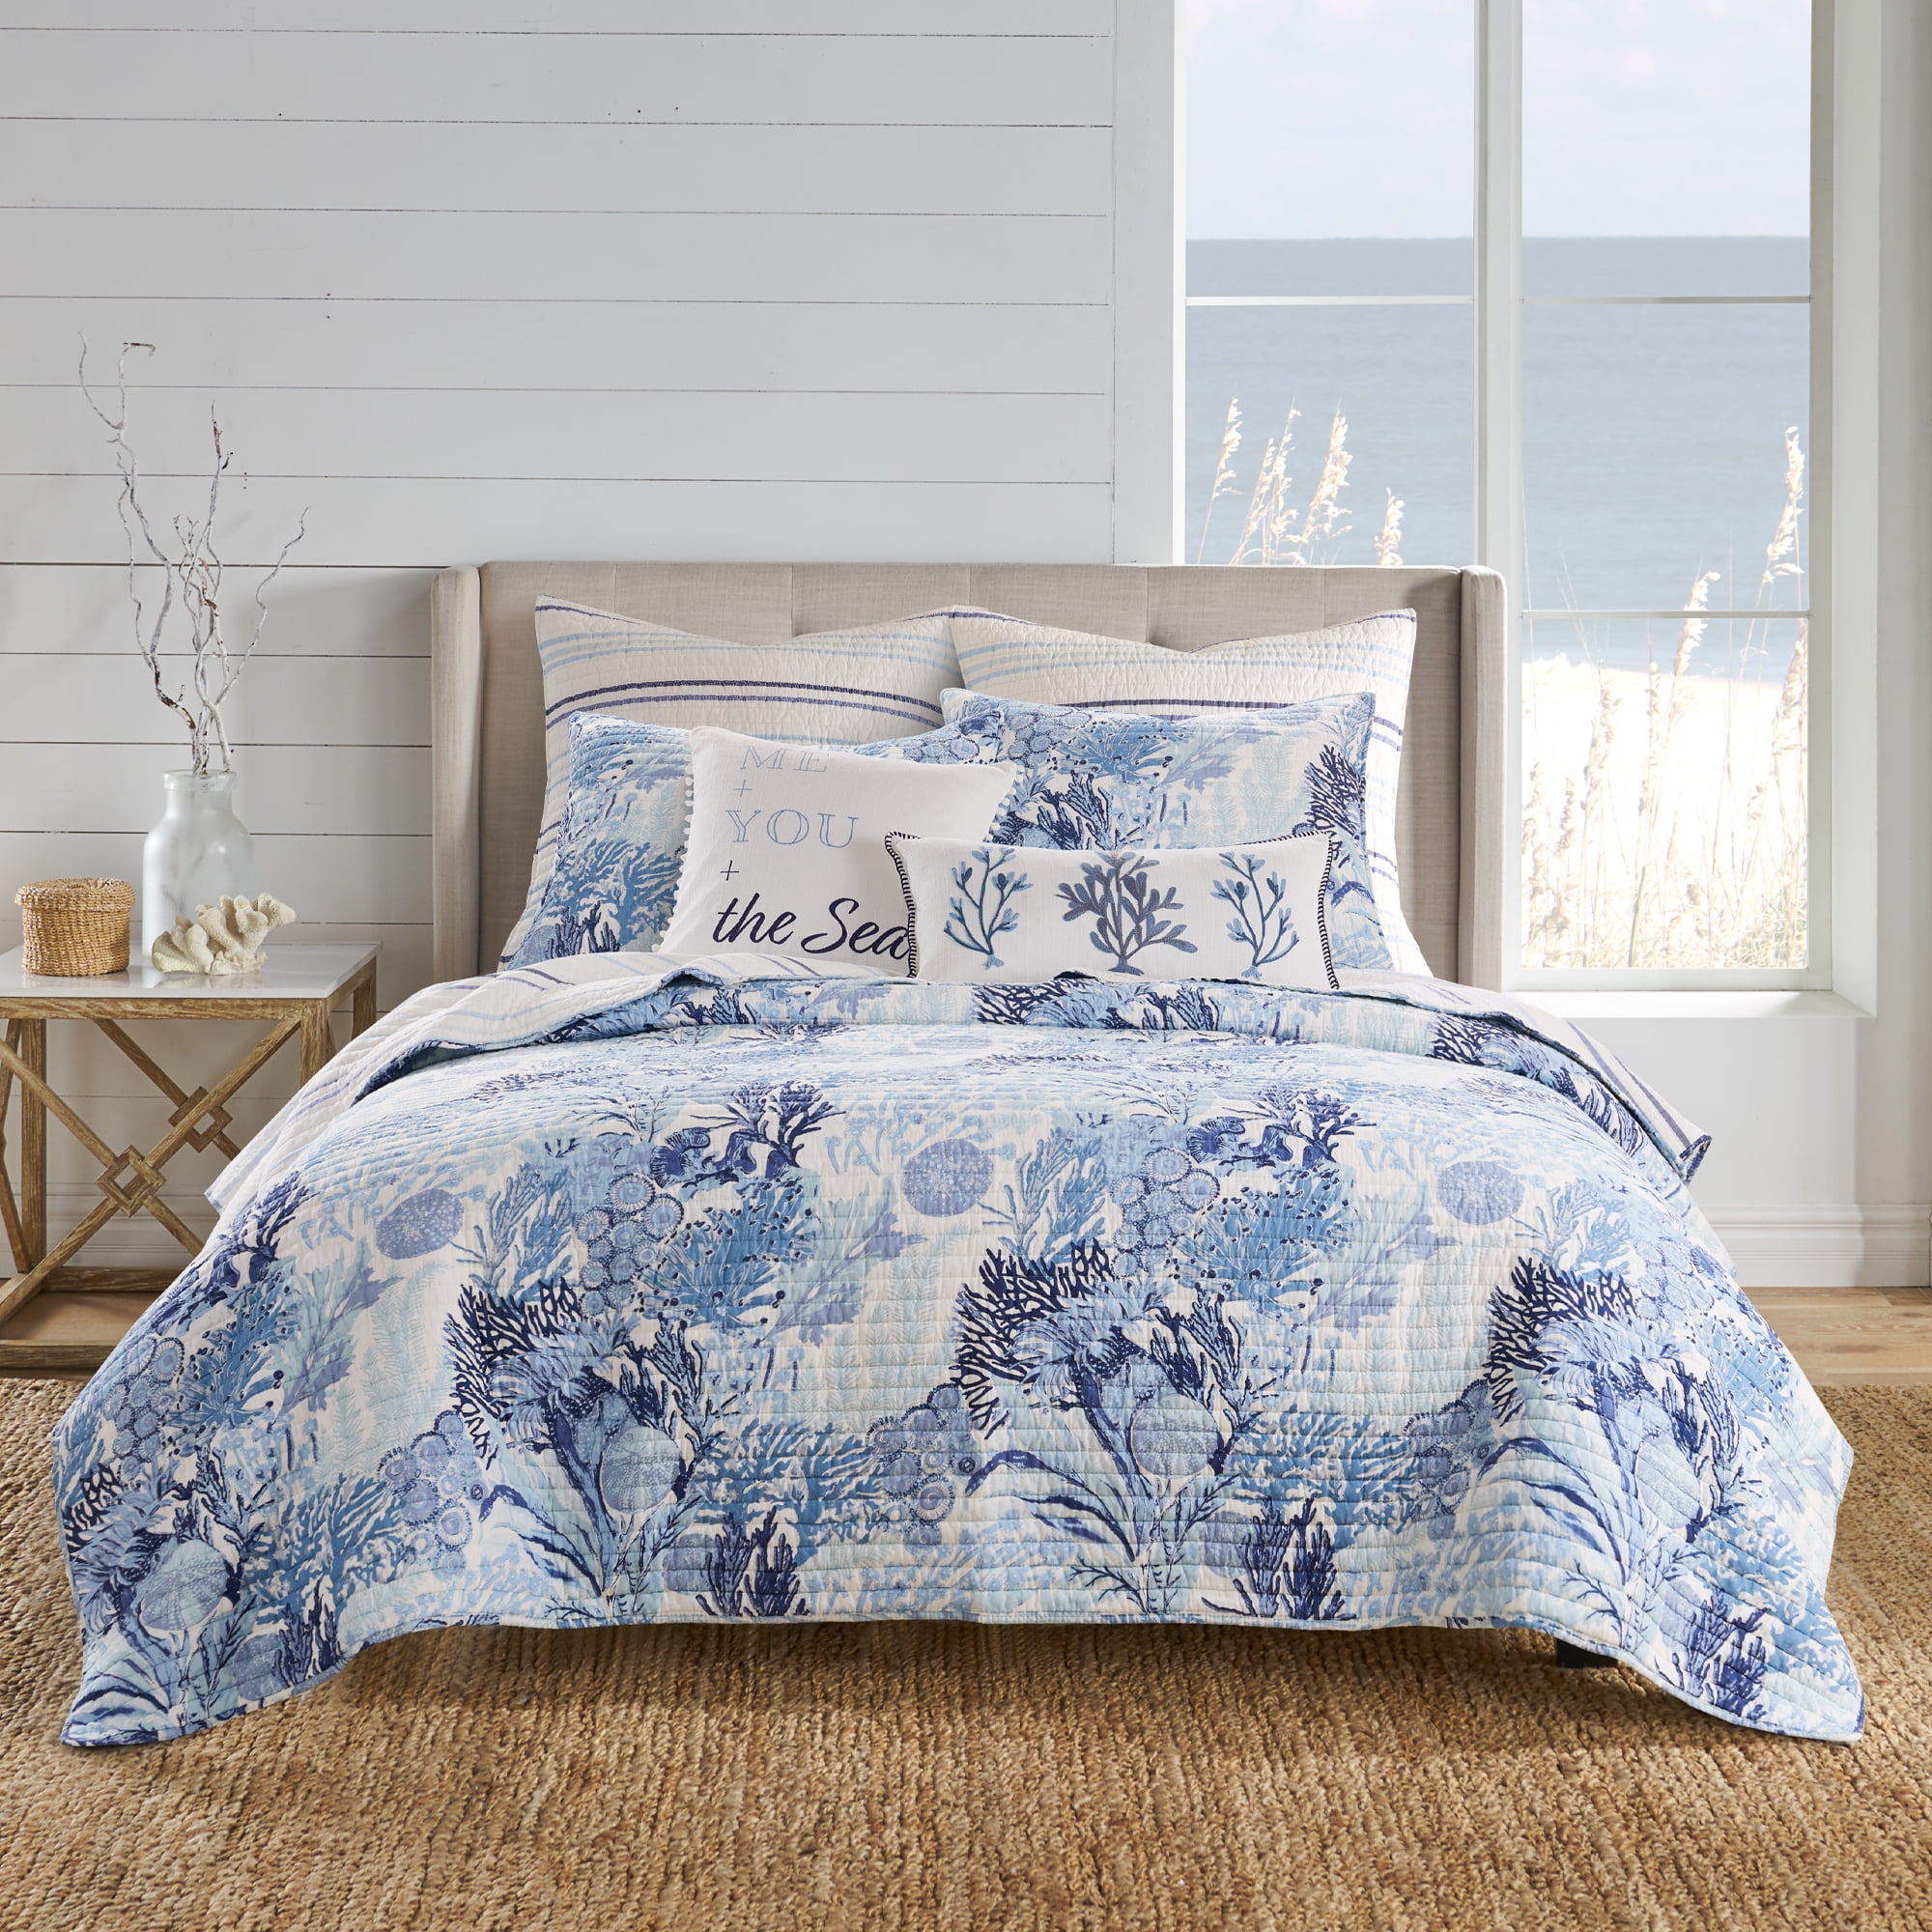 Levtex Home - Reef Dream Quilt Set - Full/Queen Quilt and Two Standard ...